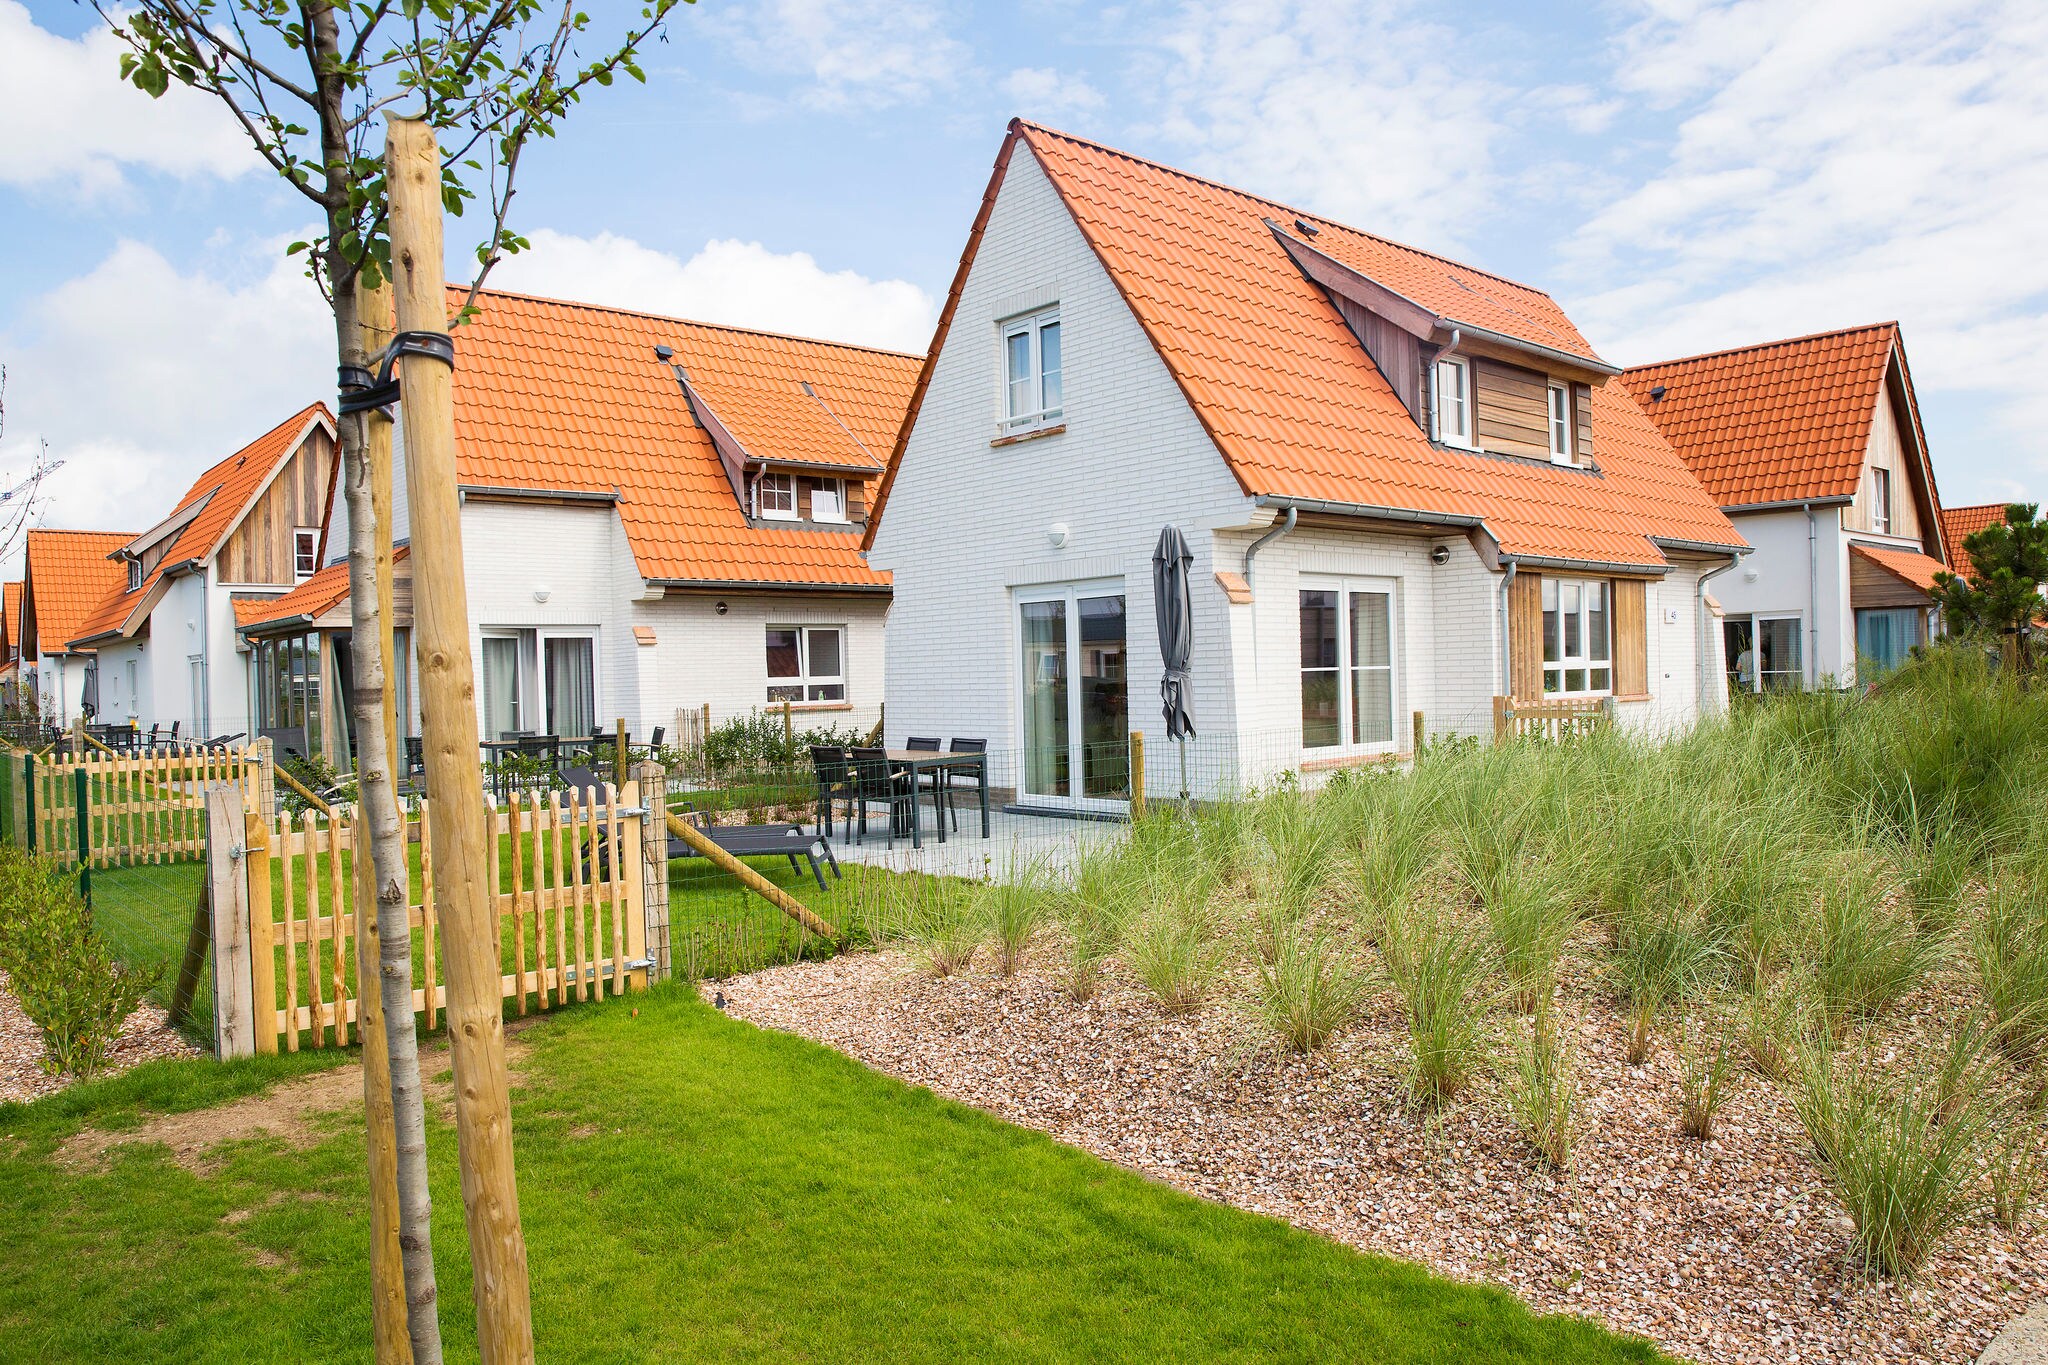 Villa, two bathrooms and a washing machine, 10km from Ostend